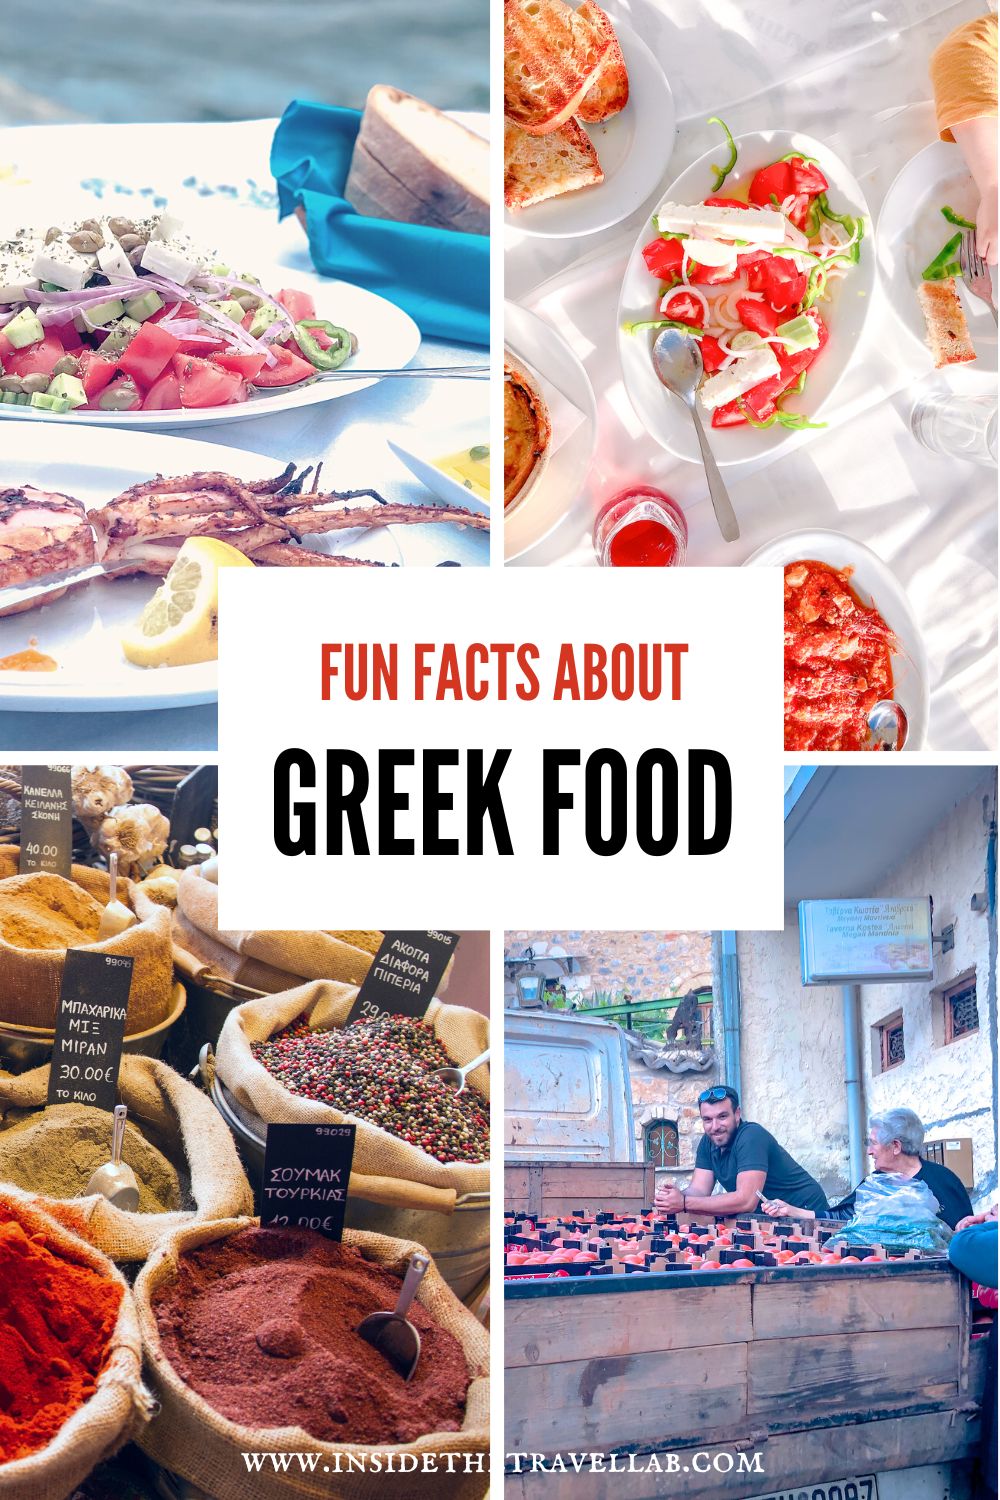 Facts about Greek food cover image with examples of traditional Greek food